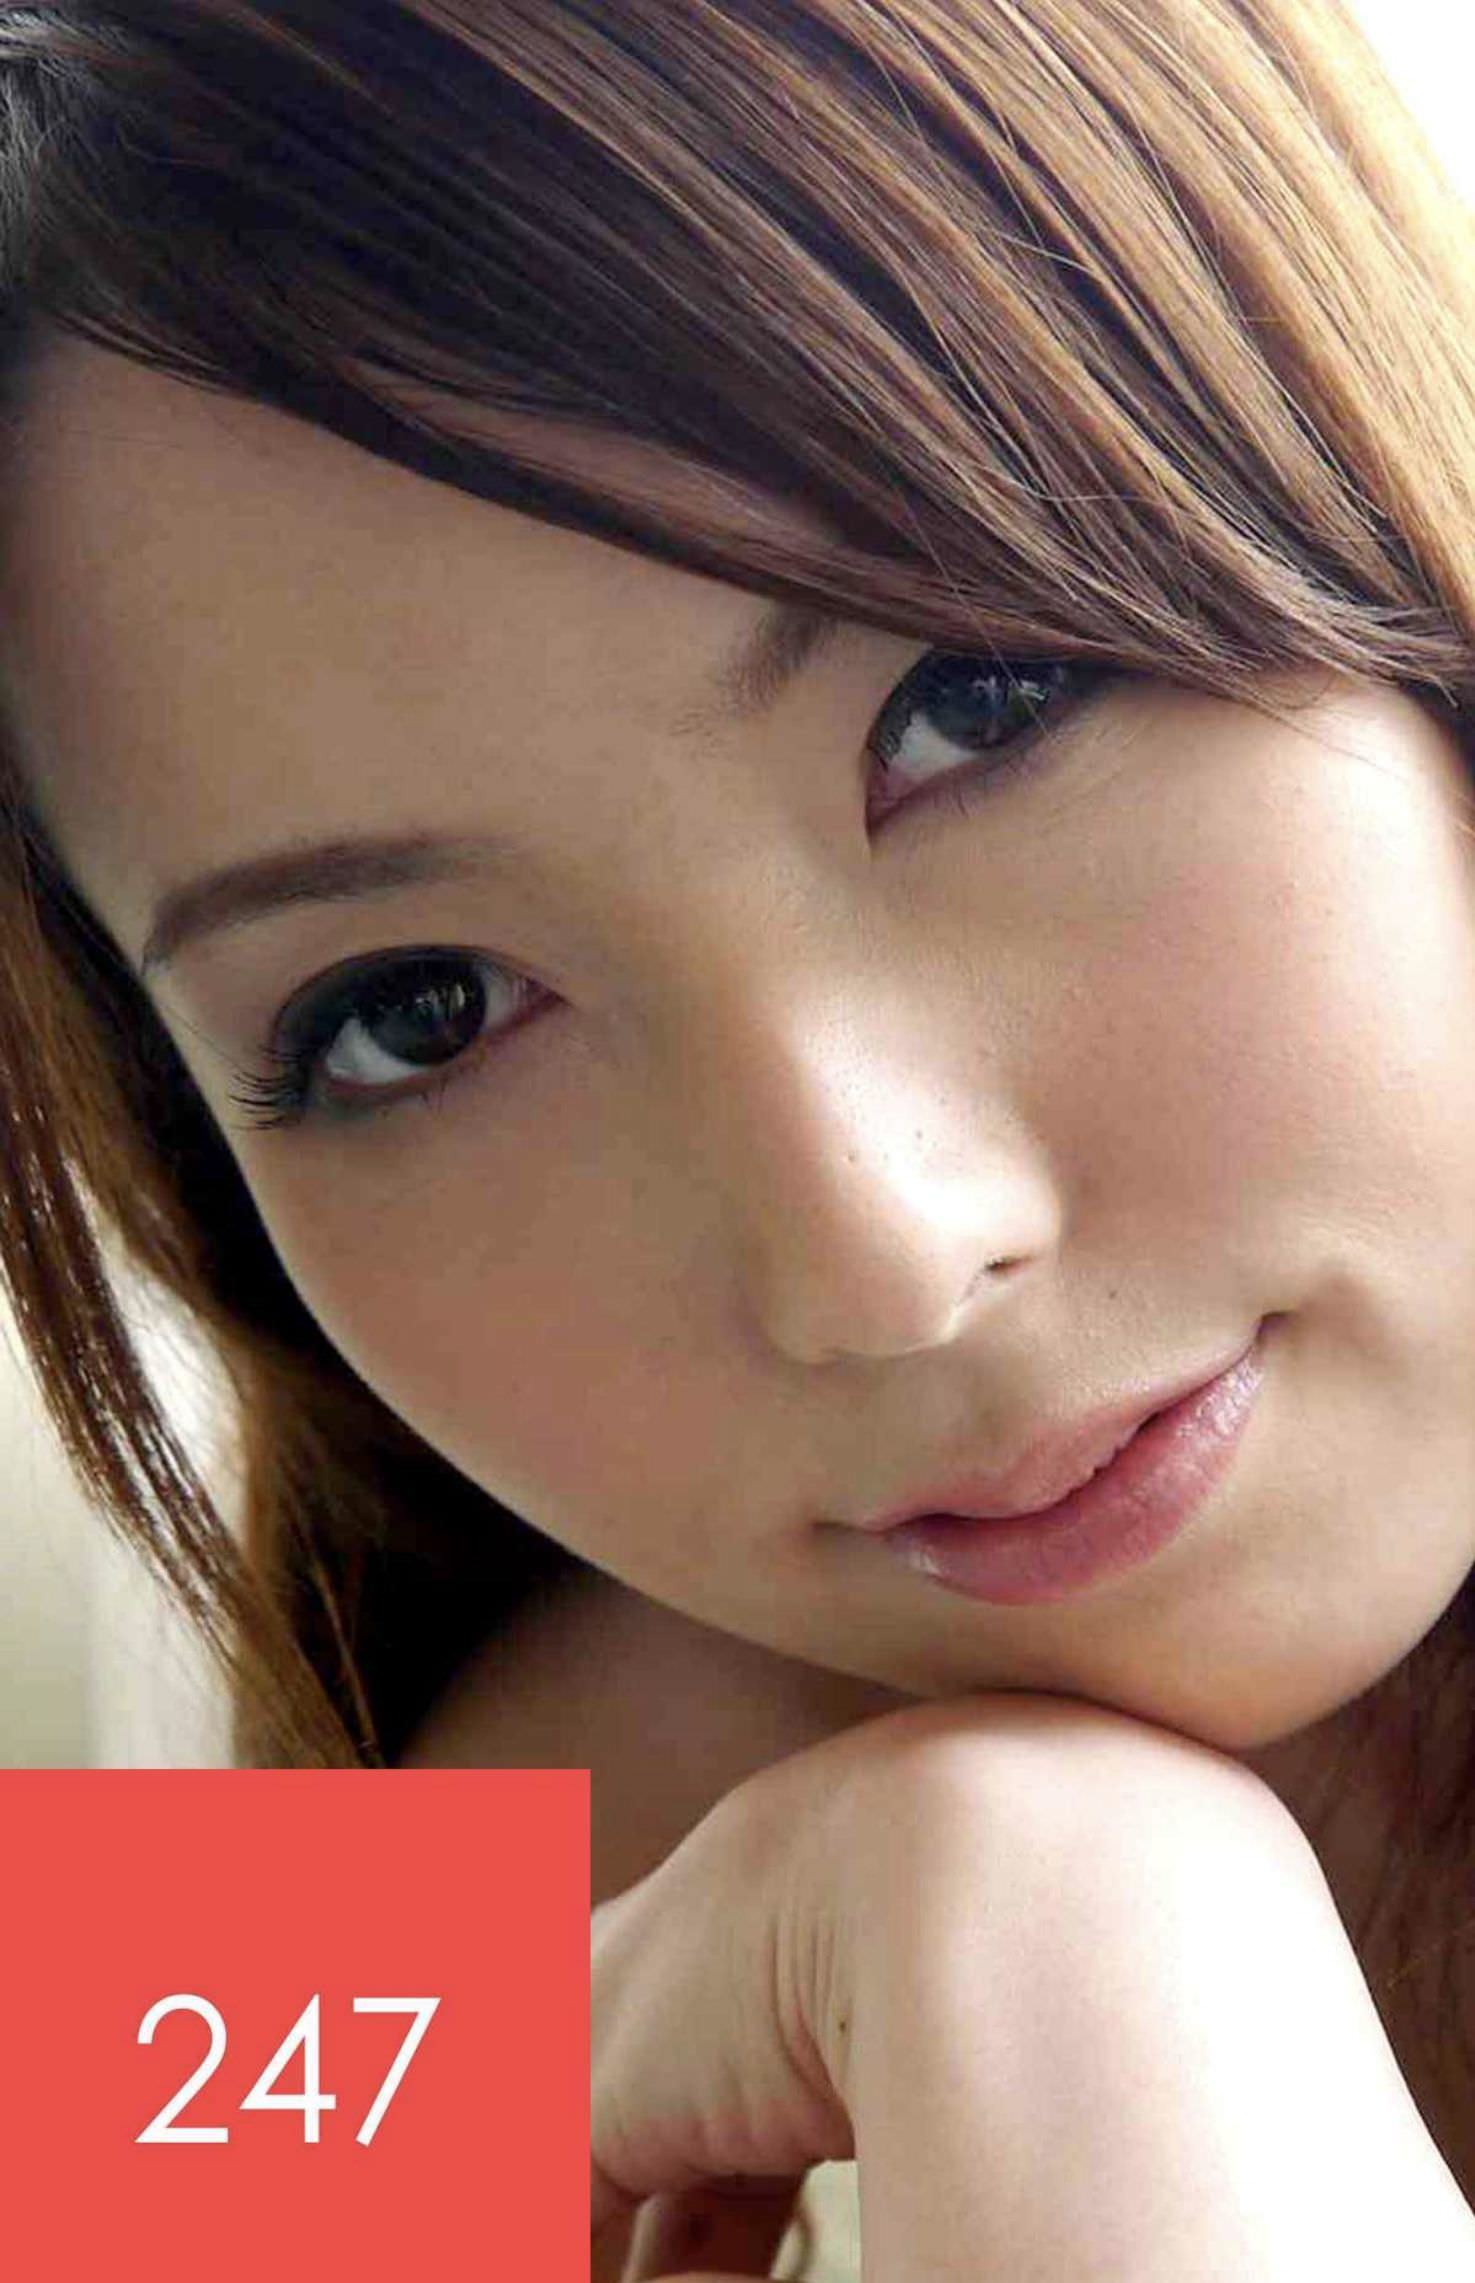 Hatano Yui's complete photo album 23 years old TOKYO247 Best Choice